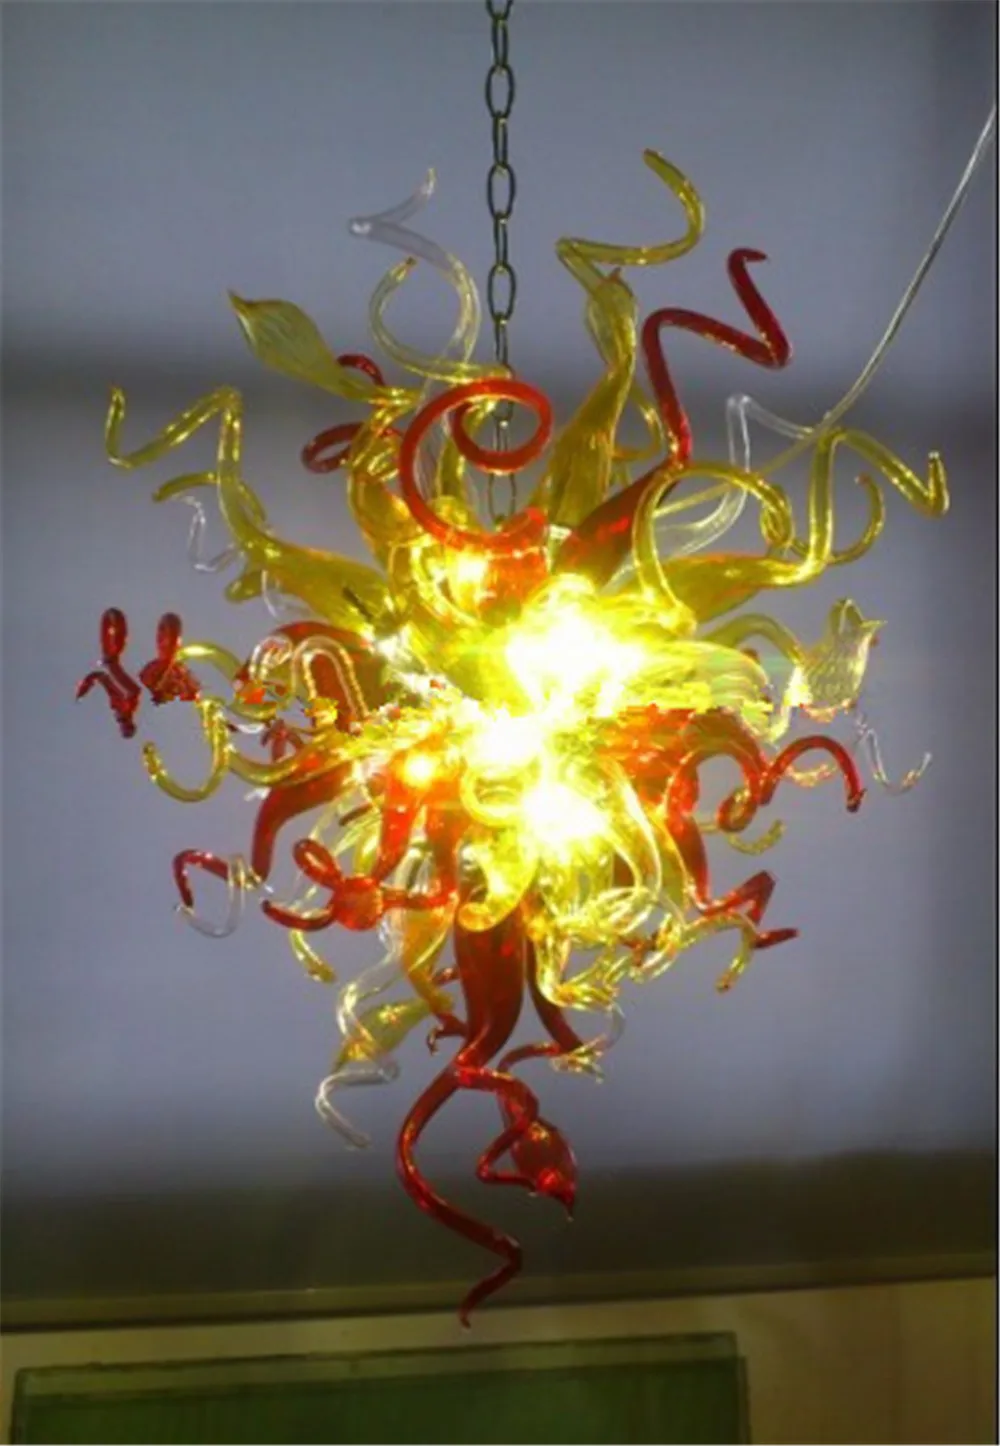 

New Arrival Hand Blown Glass Ceiling Lights Modern Artistic Colorful Chandelier for Banquet Hanging Pendant Lamp Fixtures